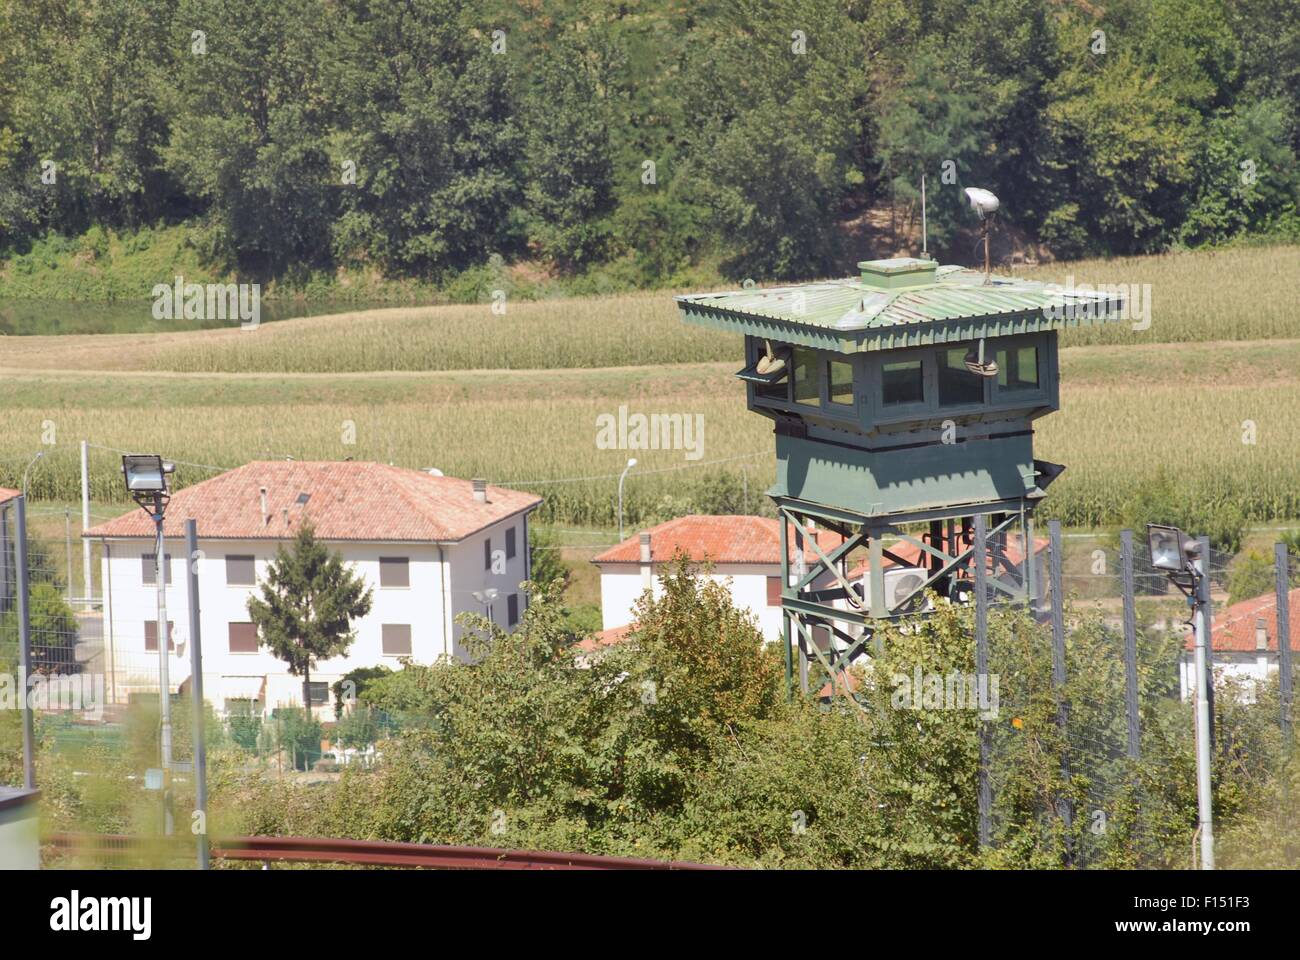 Italy, Camp Ederle US Army base in Vicenza, guard tower in Longare  detachment (former Site Pluto Stock Photo - Alamy